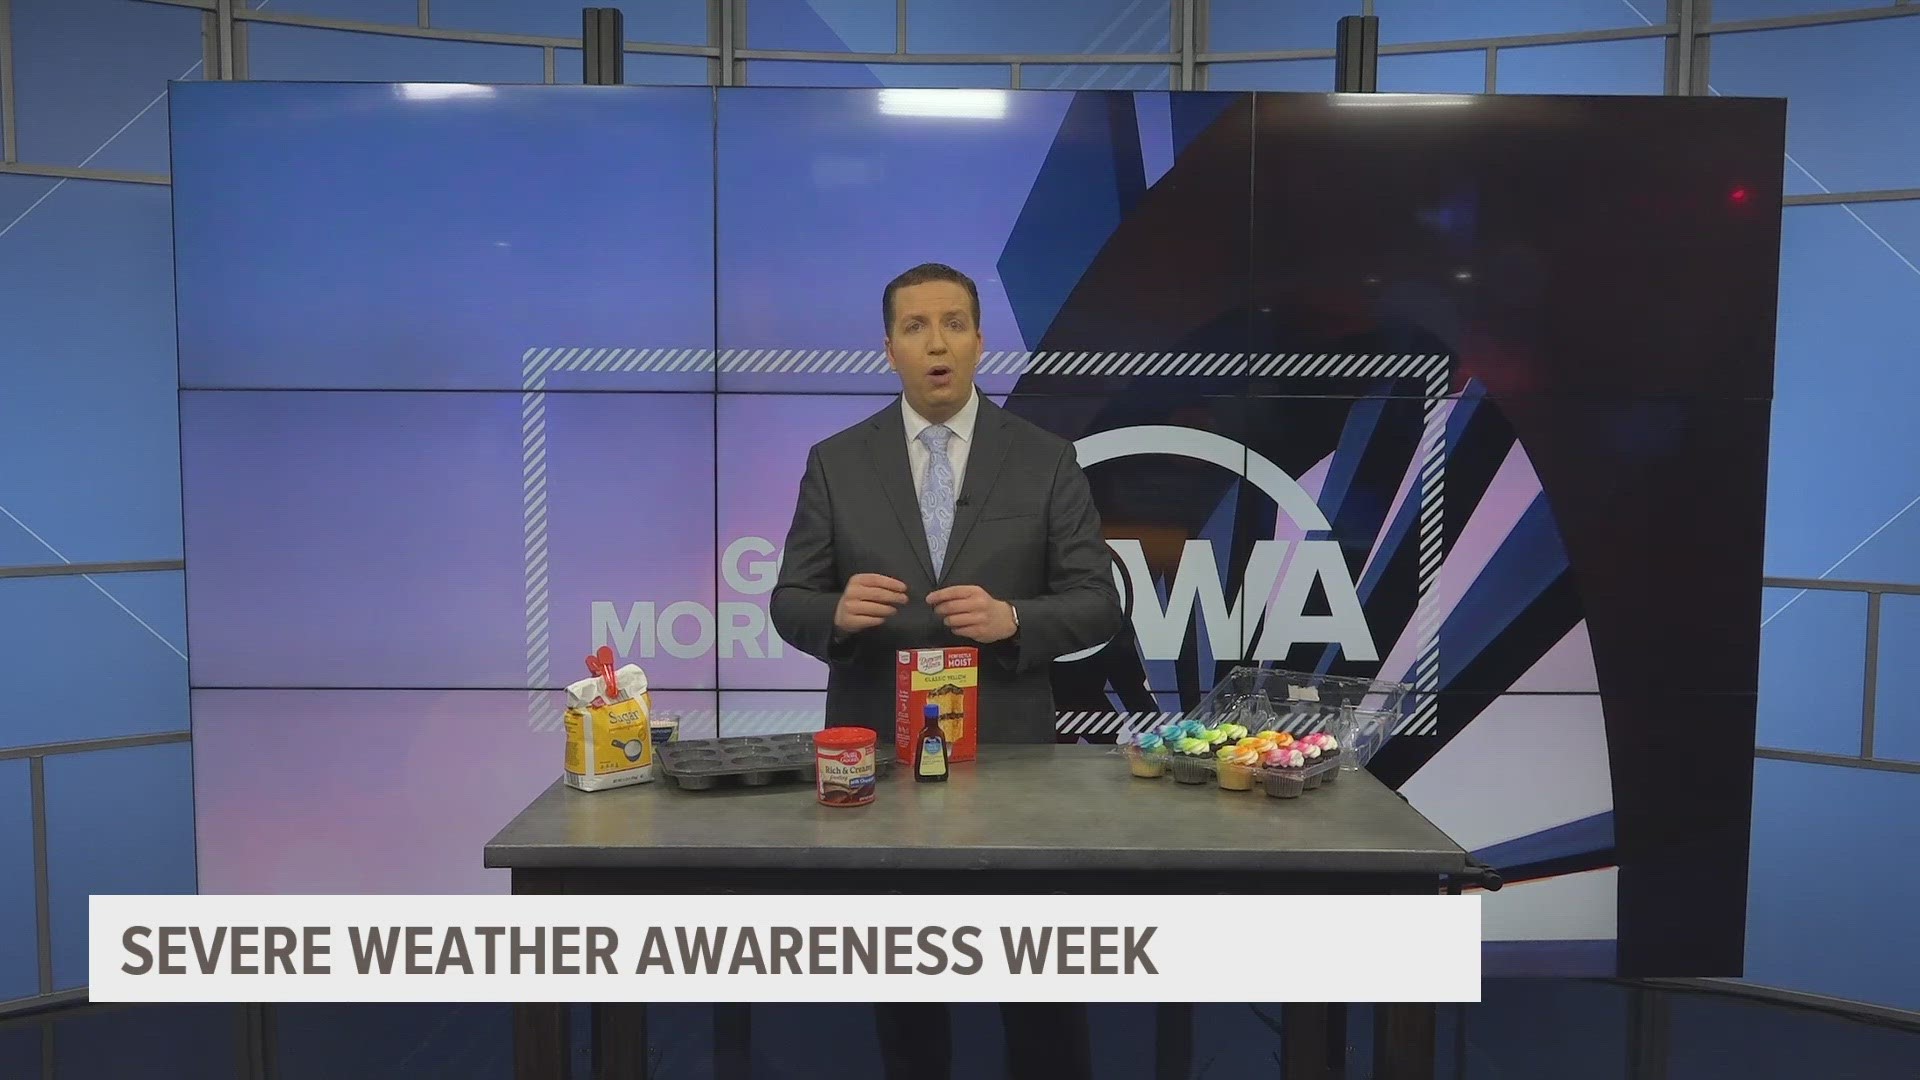 Still confused about the difference between a watch and a warning? Meteorologist Brandon Lawrence breaks it down in a sweet way.